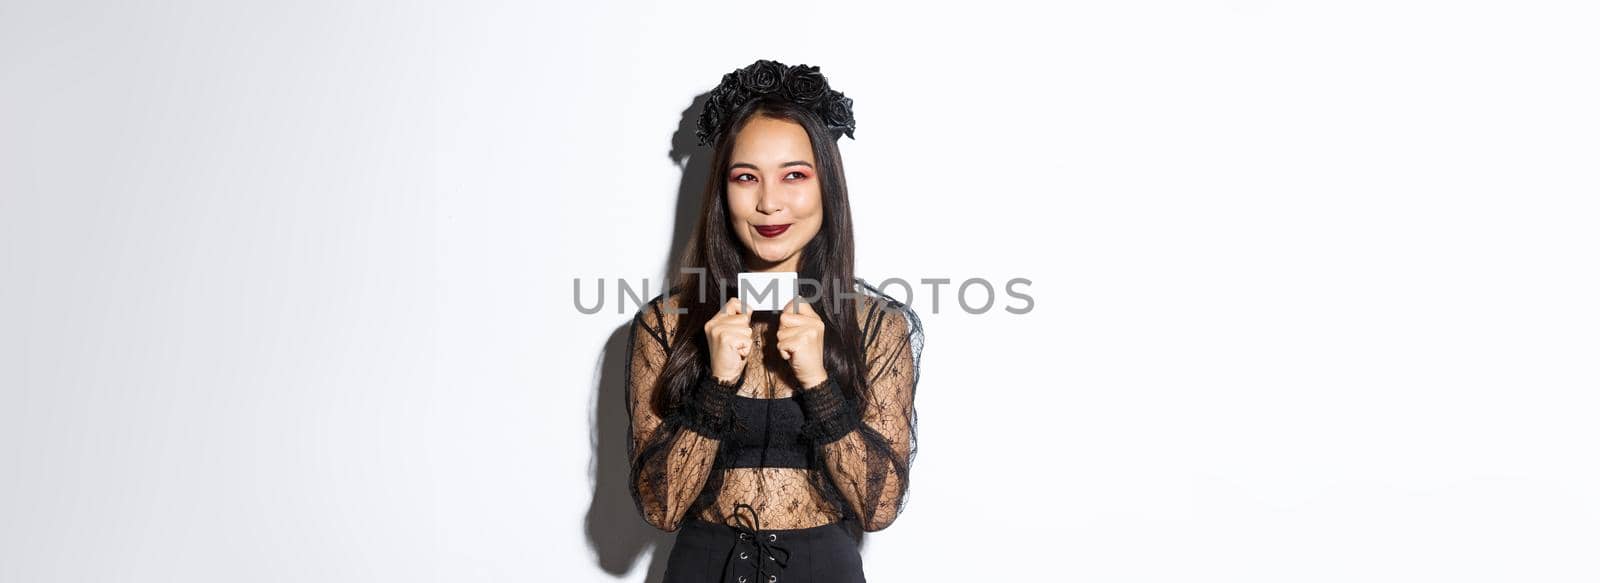 Image of thoughtful asian woman in black gothic dress have a plan, holding credit card, smiling pleased at upper left corner.